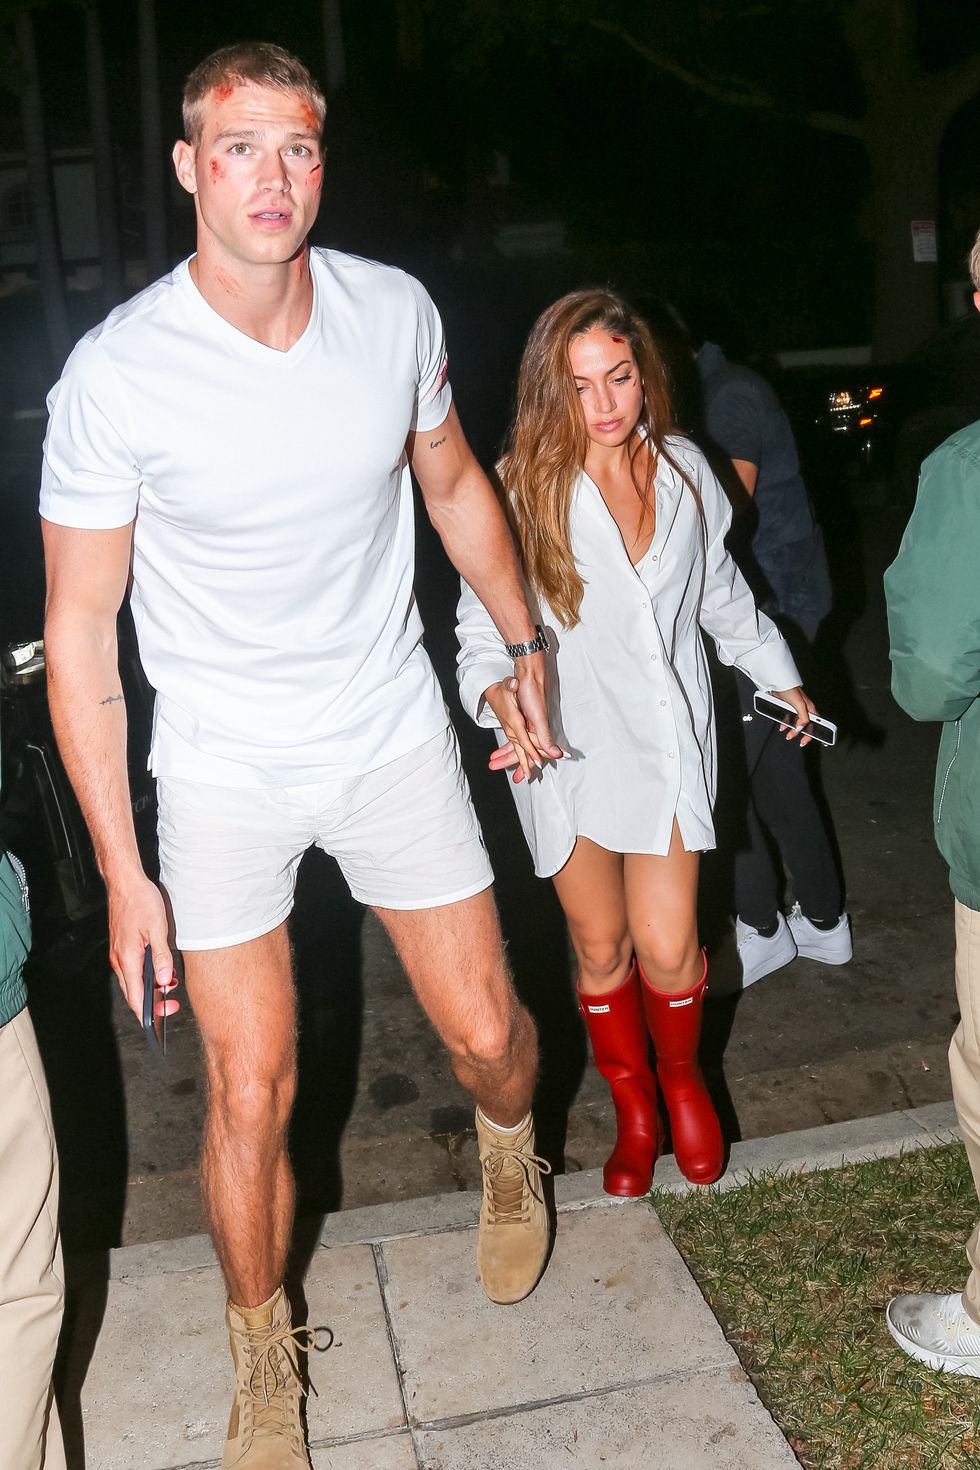 los angeles, ca october 28 matthew noszka and inanna sarkis are seen attending the casamigos halloween party returns in beverly hills on october 28, 2022 in los angeles, california photo by rachpootbauer griffingc images